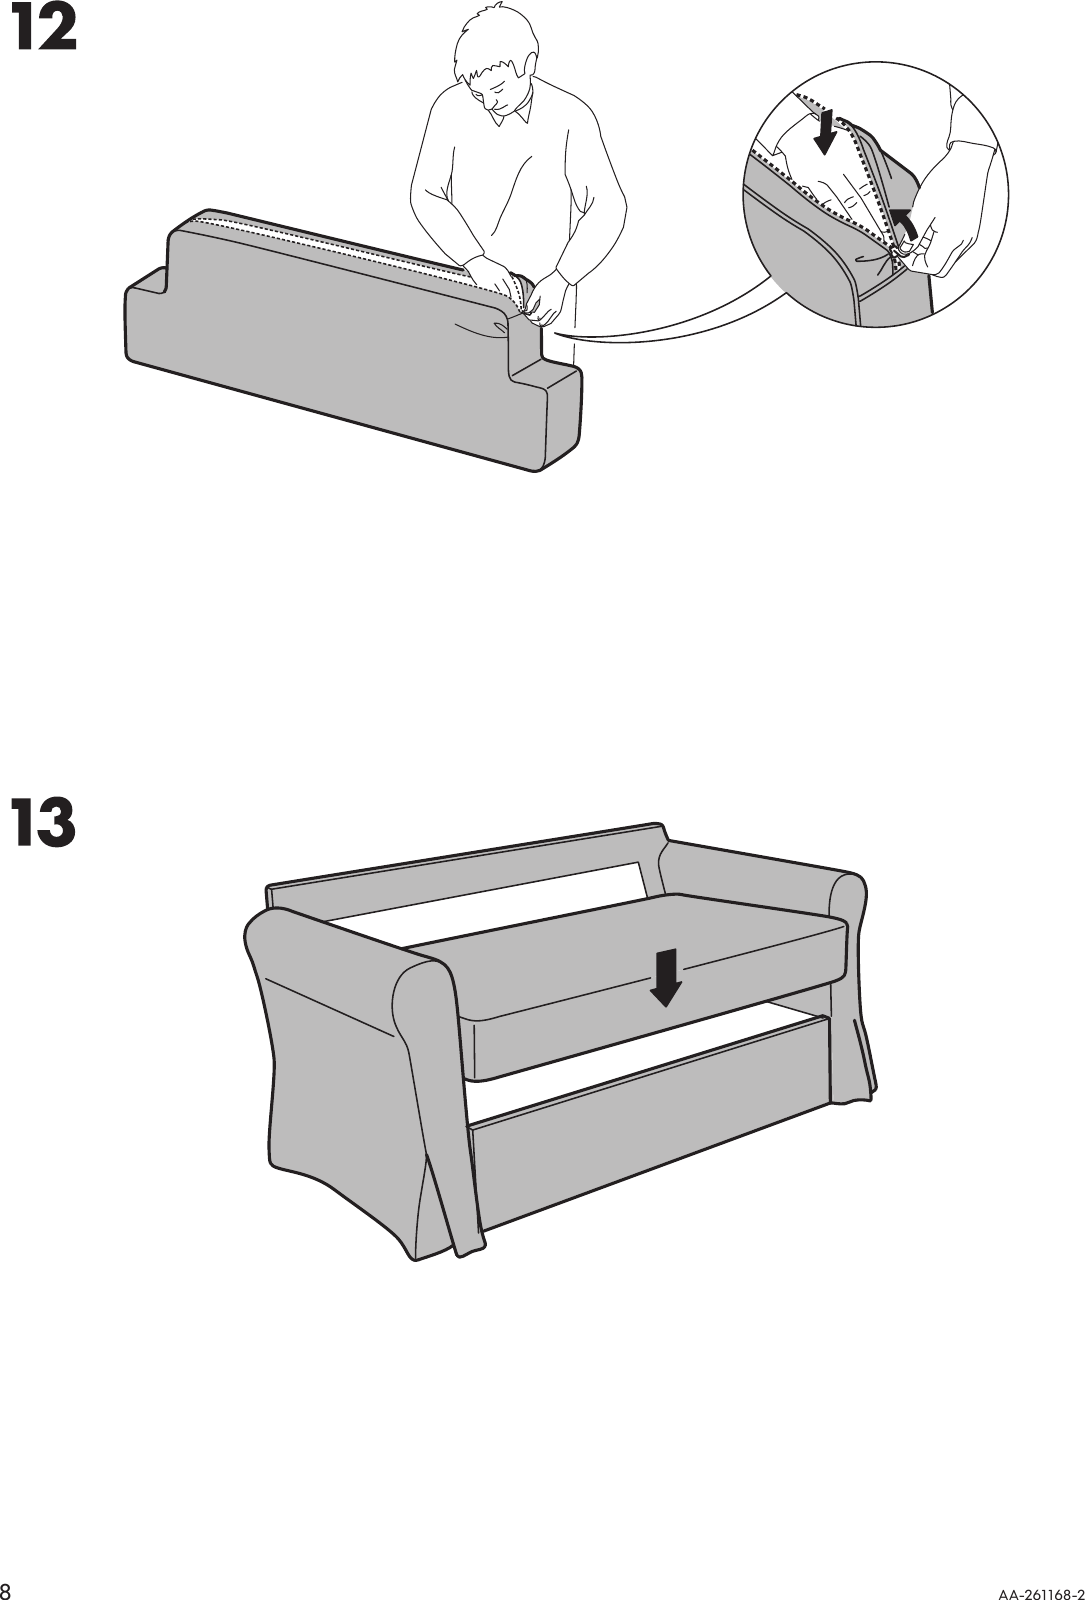 Page 8 of 12 - Ikea Ikea-Hagalund-Sofa-Bed-Cover-Assembly-Instruction